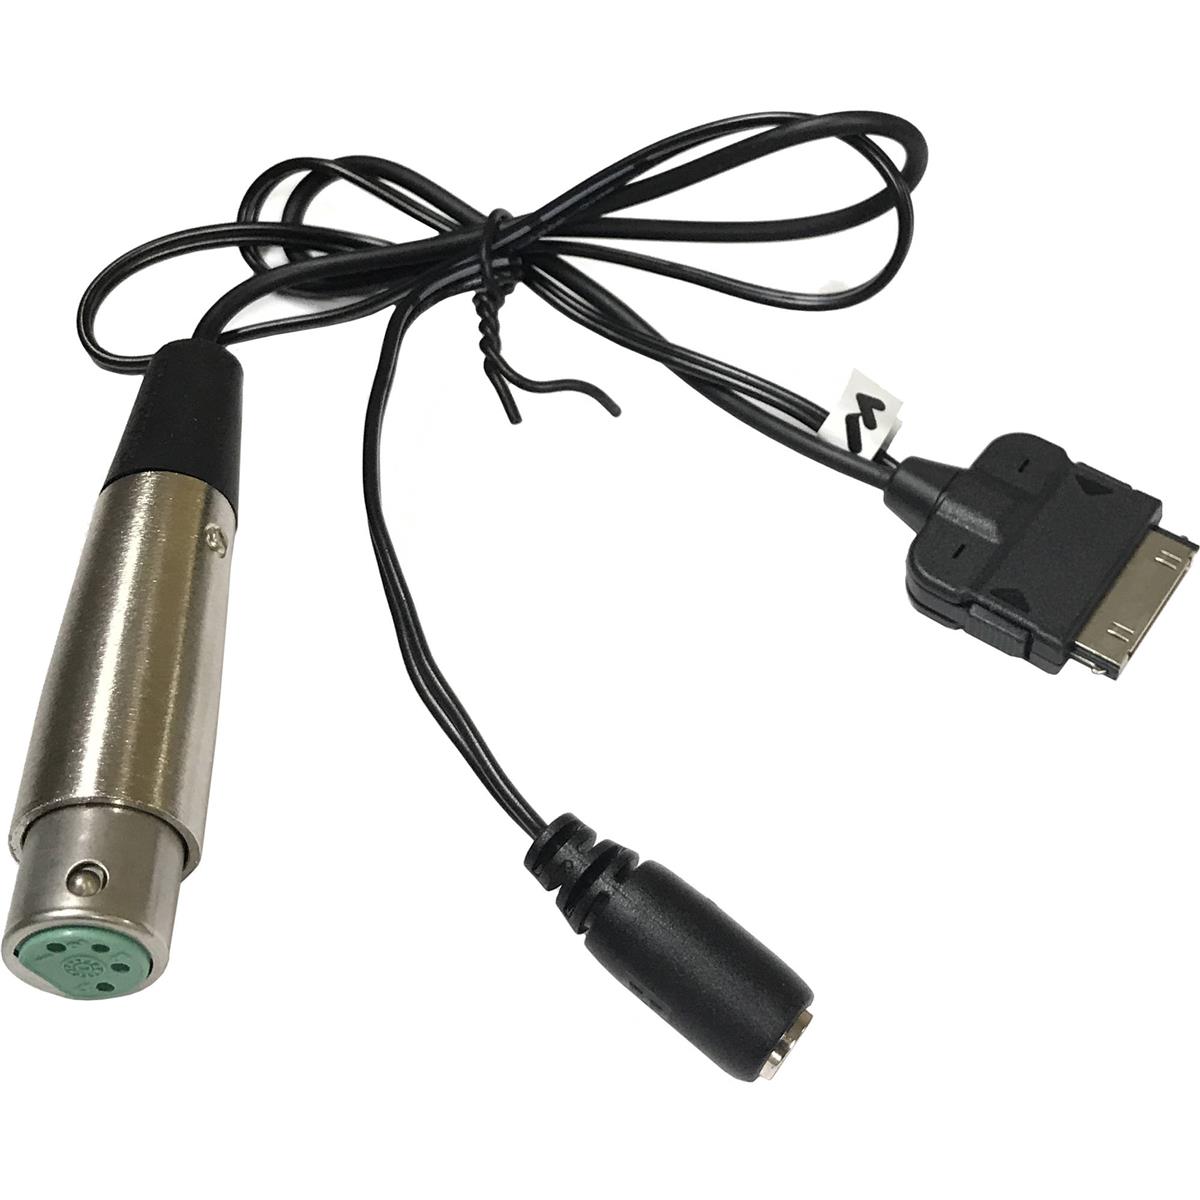 Image of Williams Sound WCA 127 Interface Cable for DW SY1 and DW Sy2 Intercom Bridge